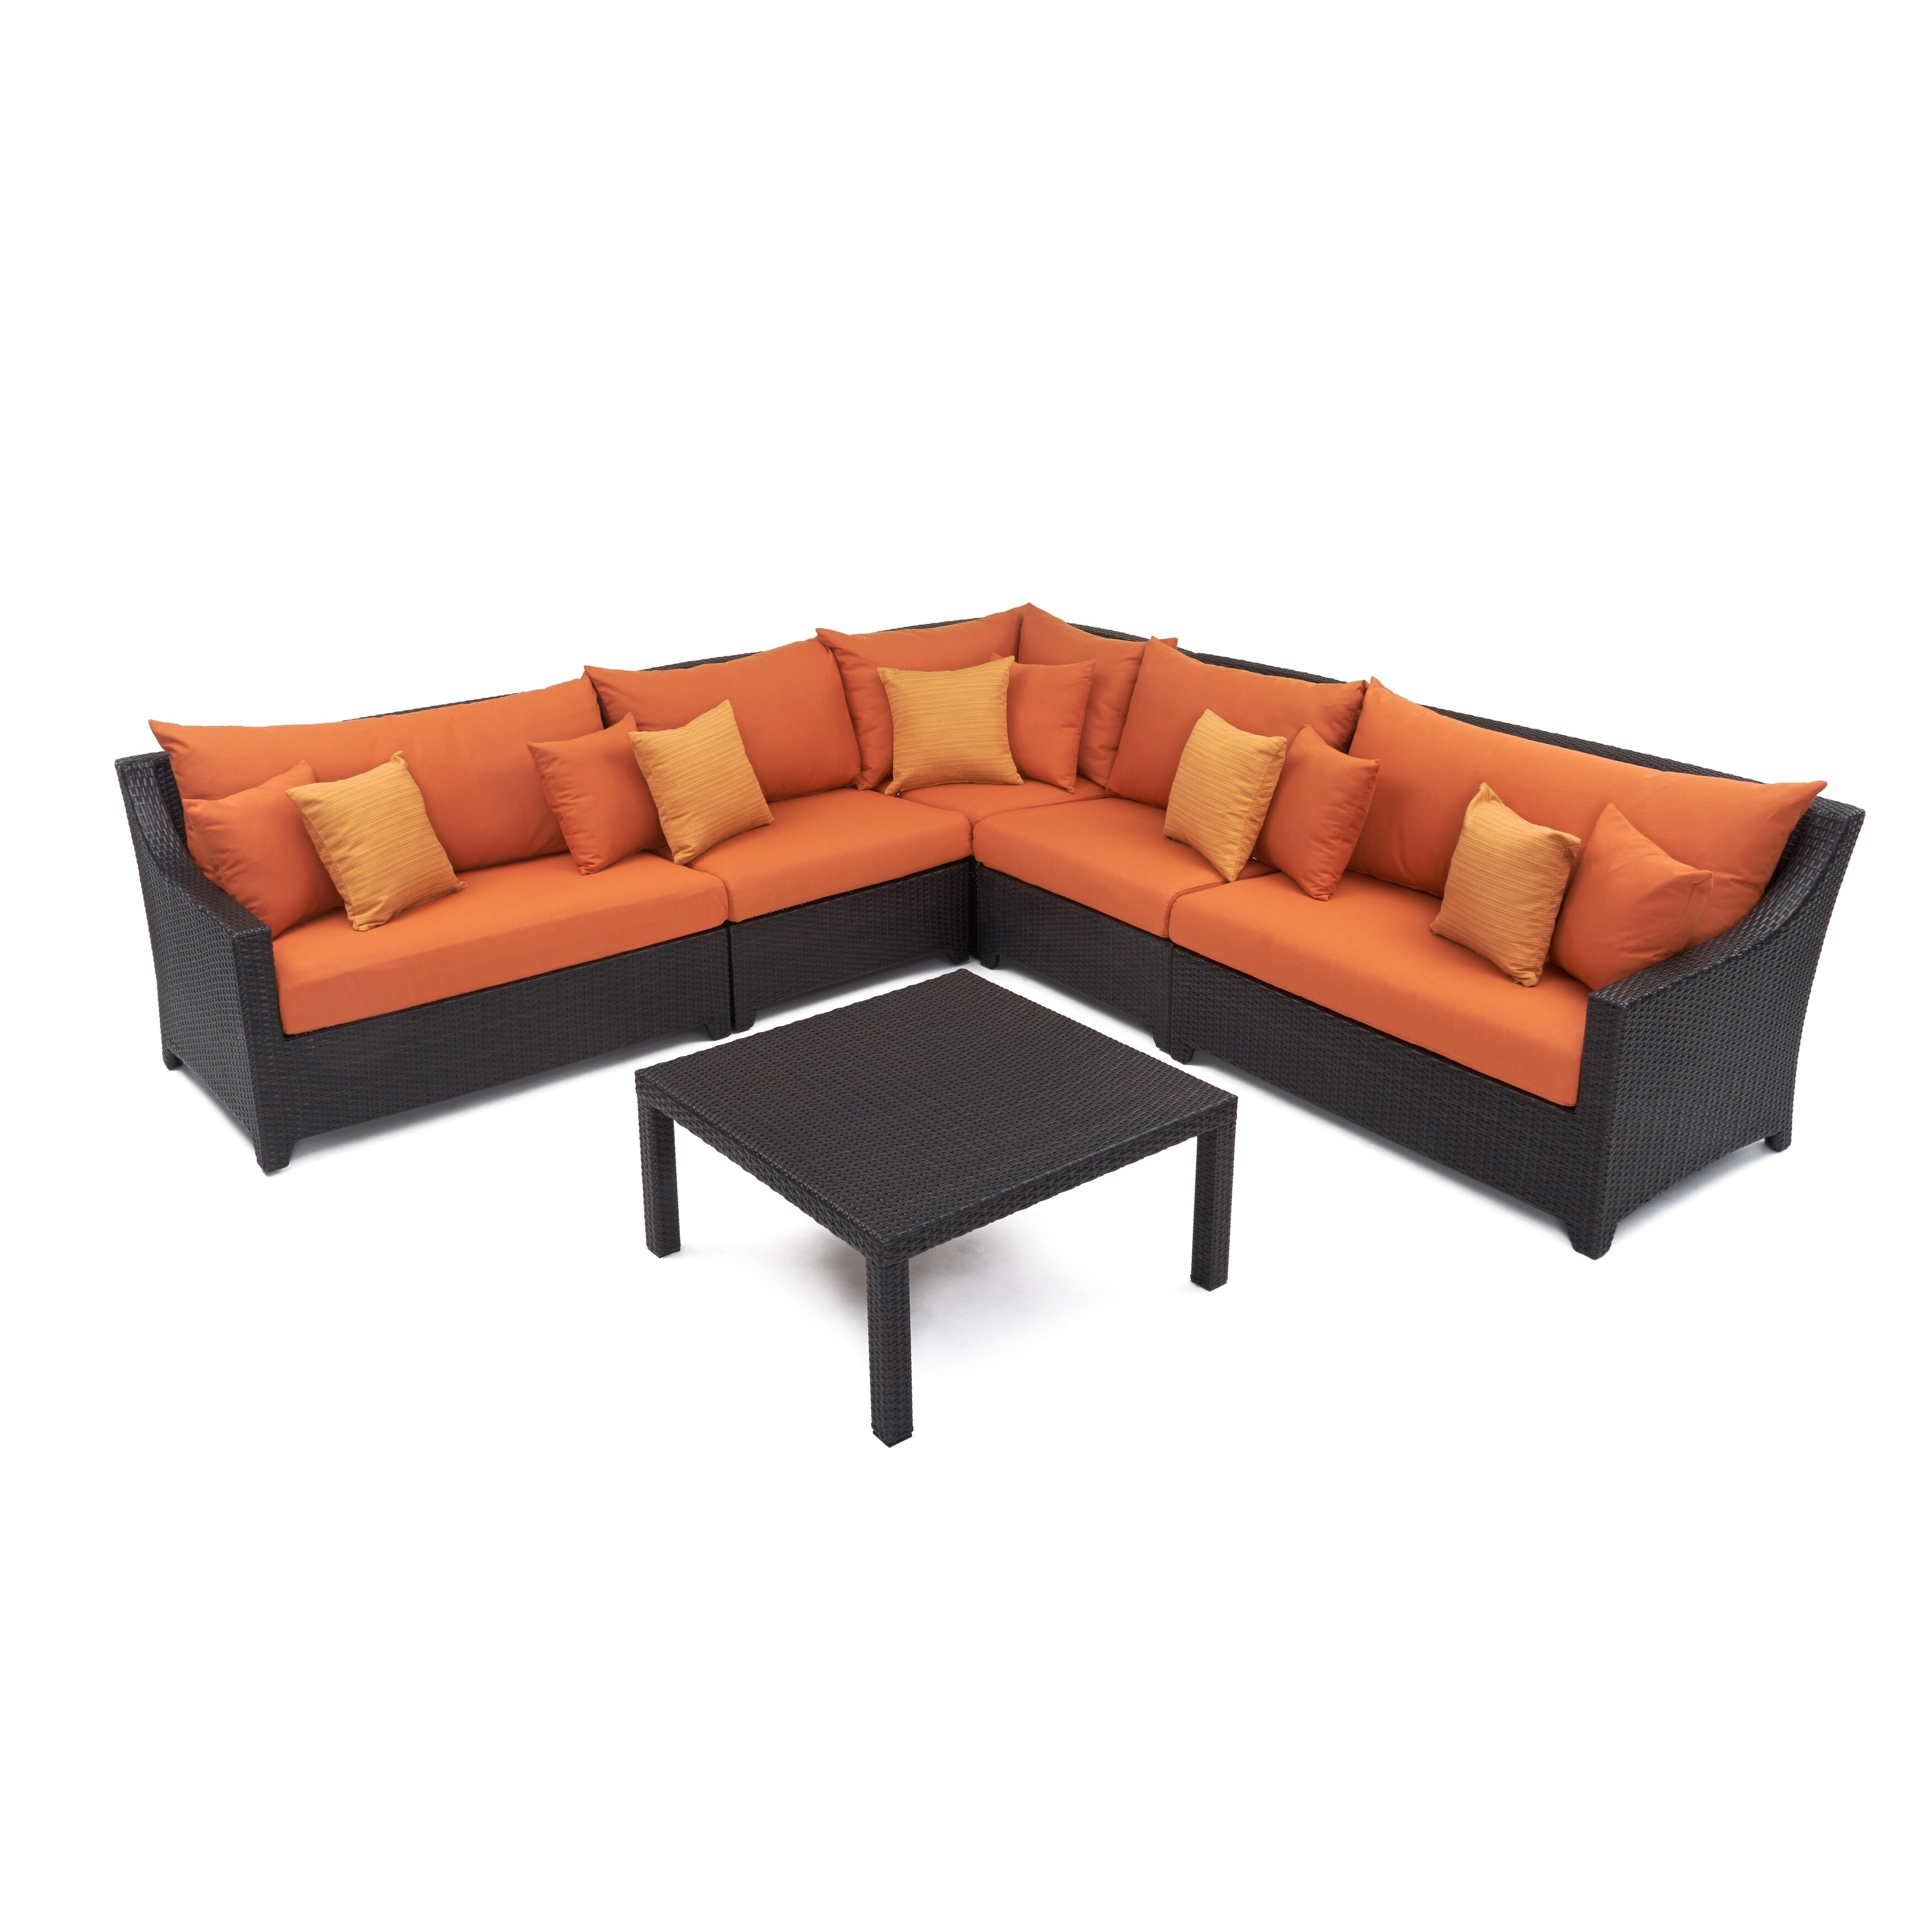 Rst Outdoor tikka 6-piece Corner Sectional Sofa And Coffee Table Patio Furniture Set